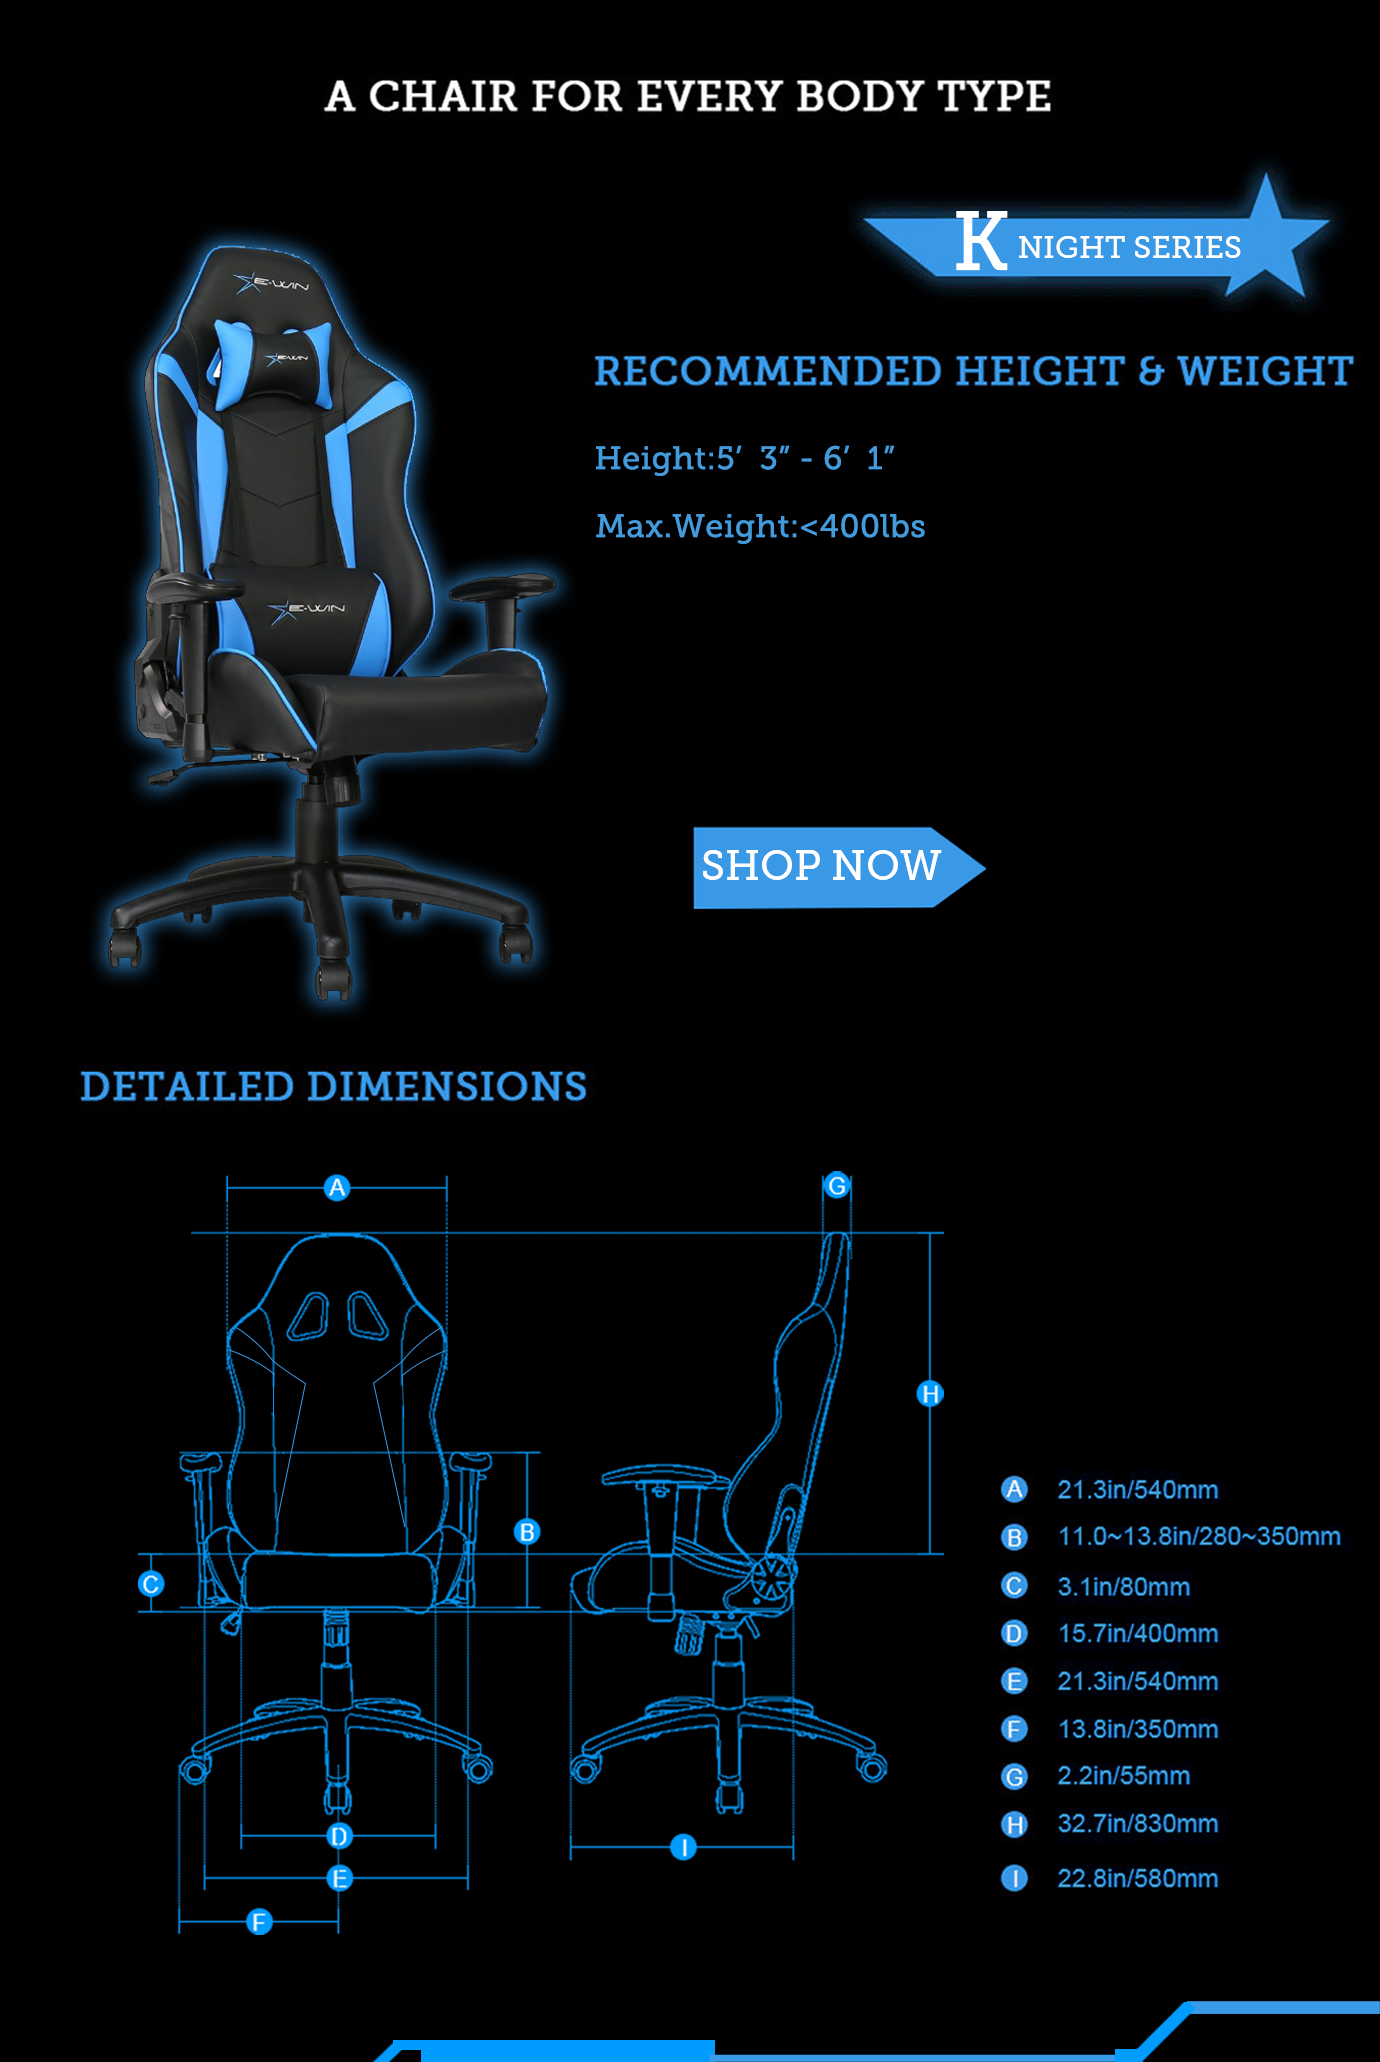 Dimensions of E-WIN Knight Series Gaming Chairs